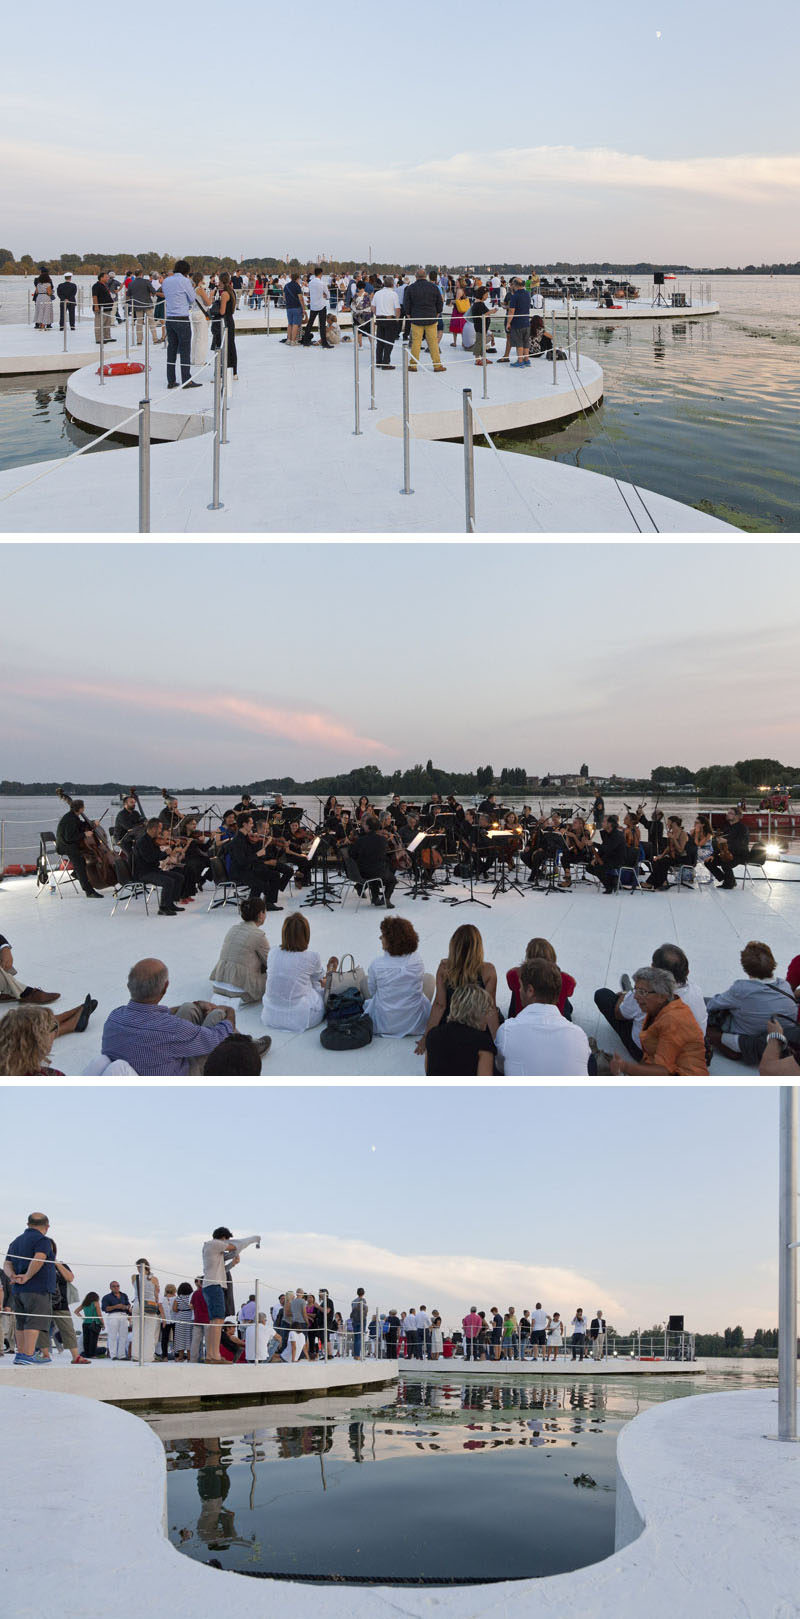 Floating islands, inspired by the lotus plant, have become a performance space on a lake in Italy.